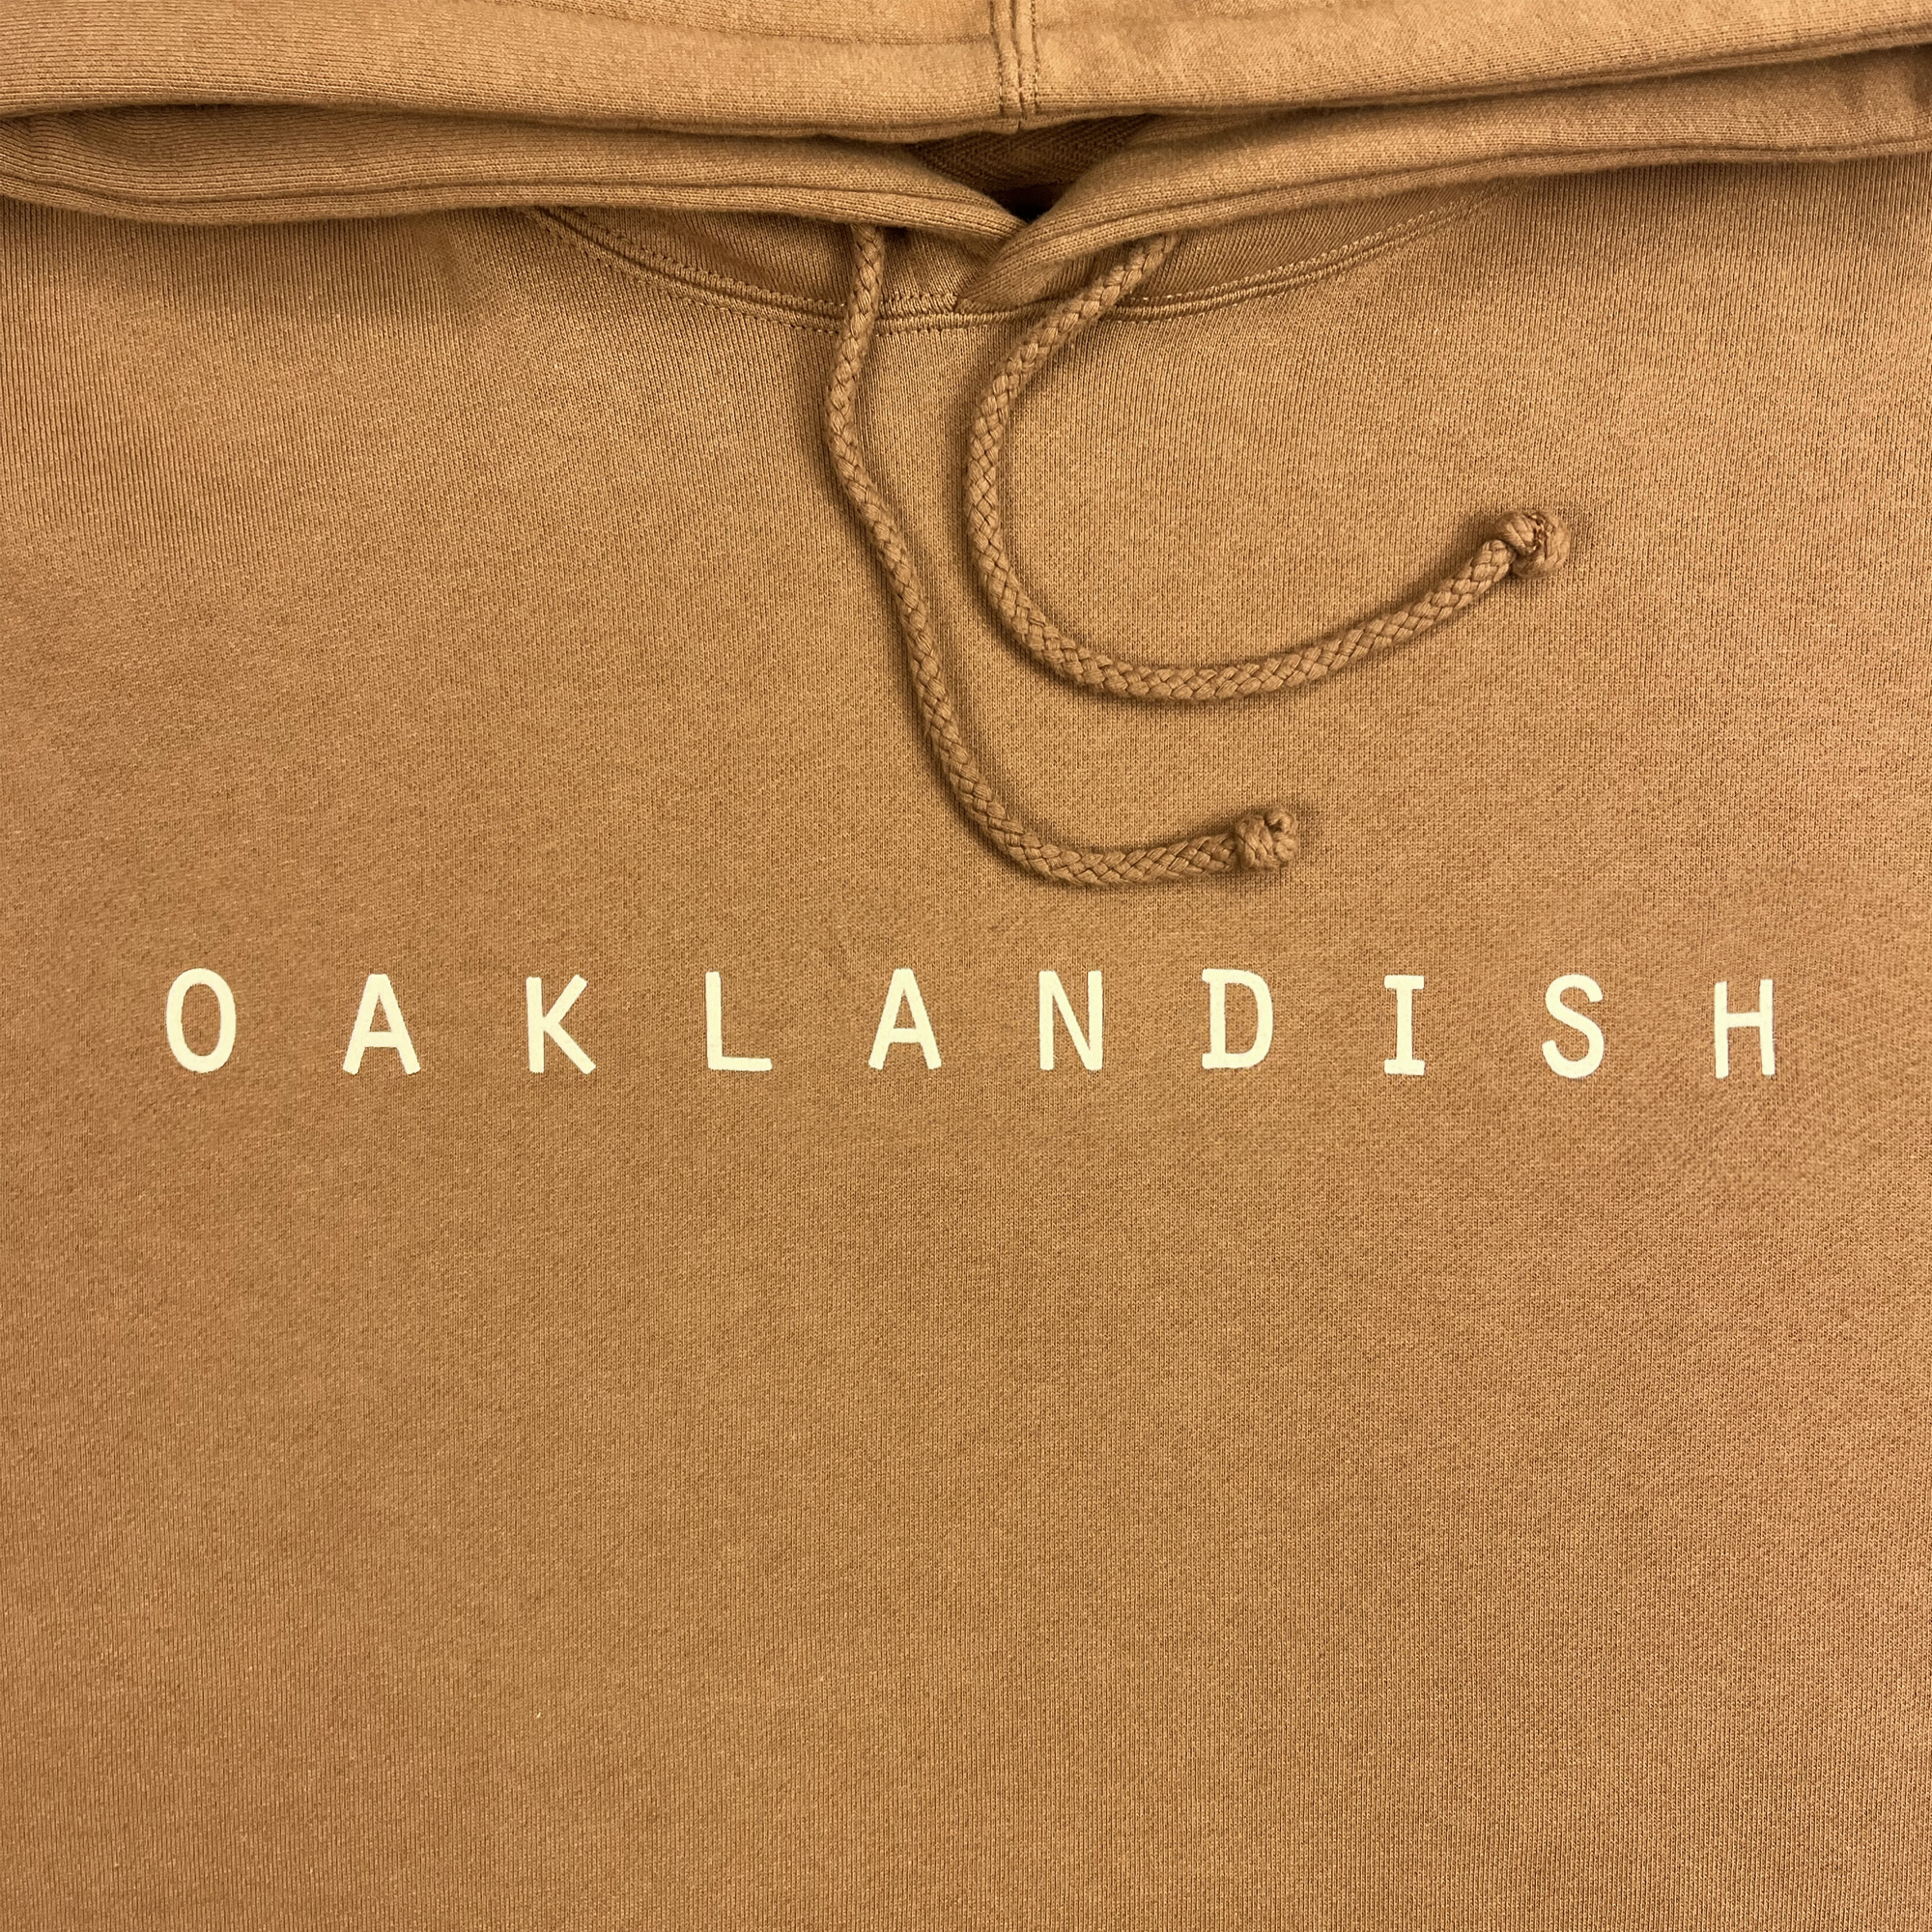 Detail front view of Premium pullover Hoodie - Classic Oaklandish, Saddle brown.